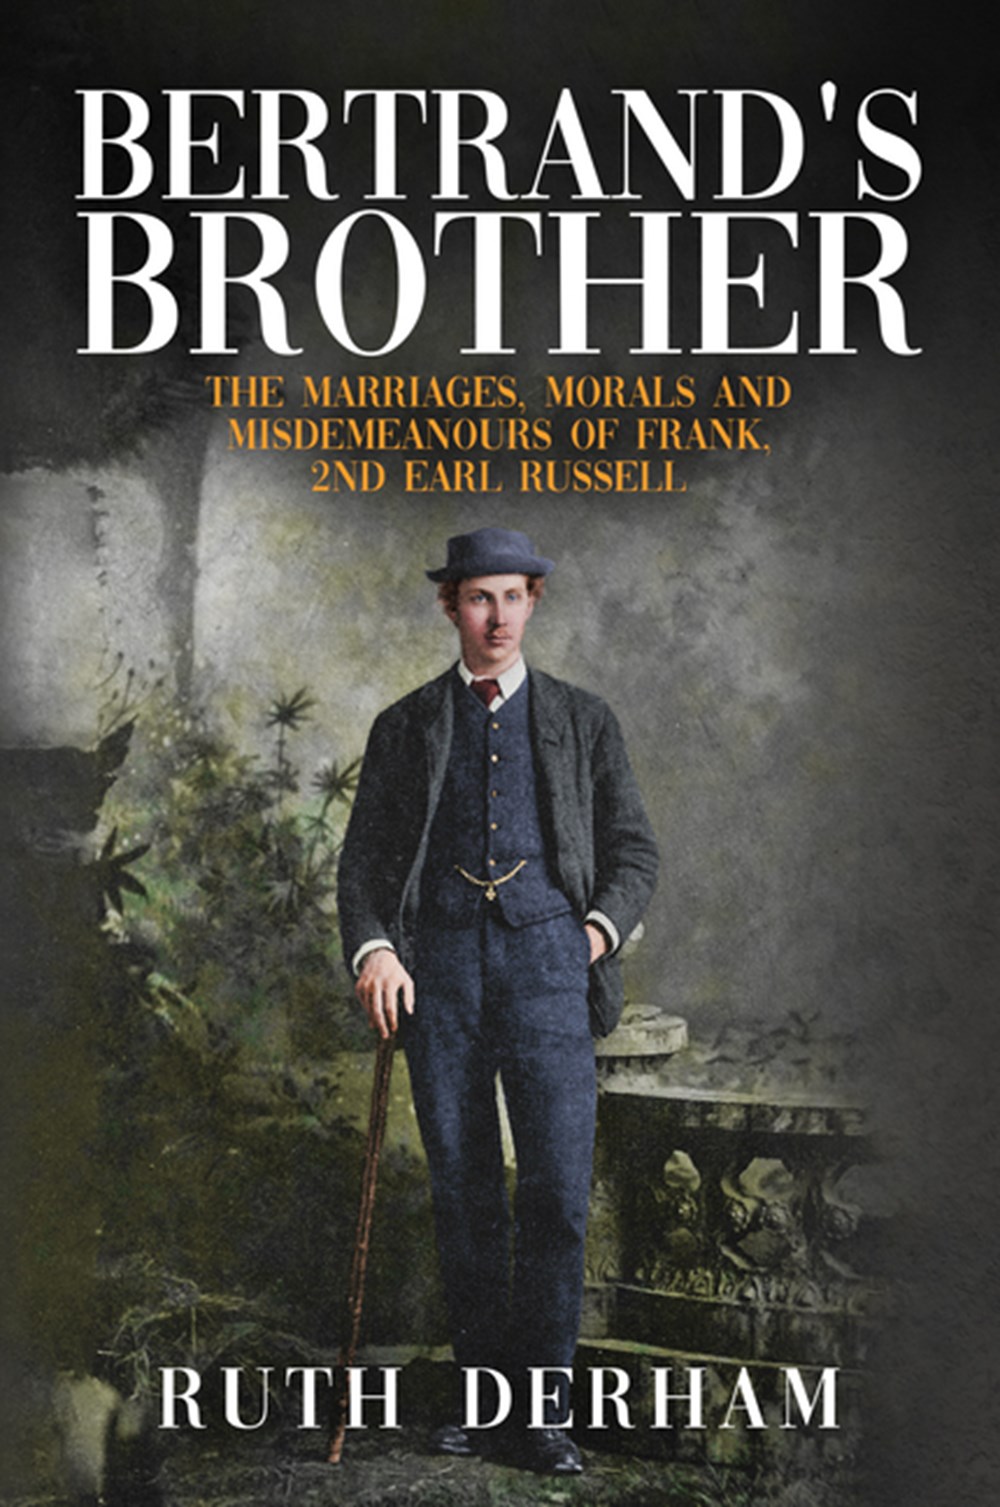 Bertrand's Brother The Marriages, Morals and Misdemeanours of Frank, 2nd Earl Russell